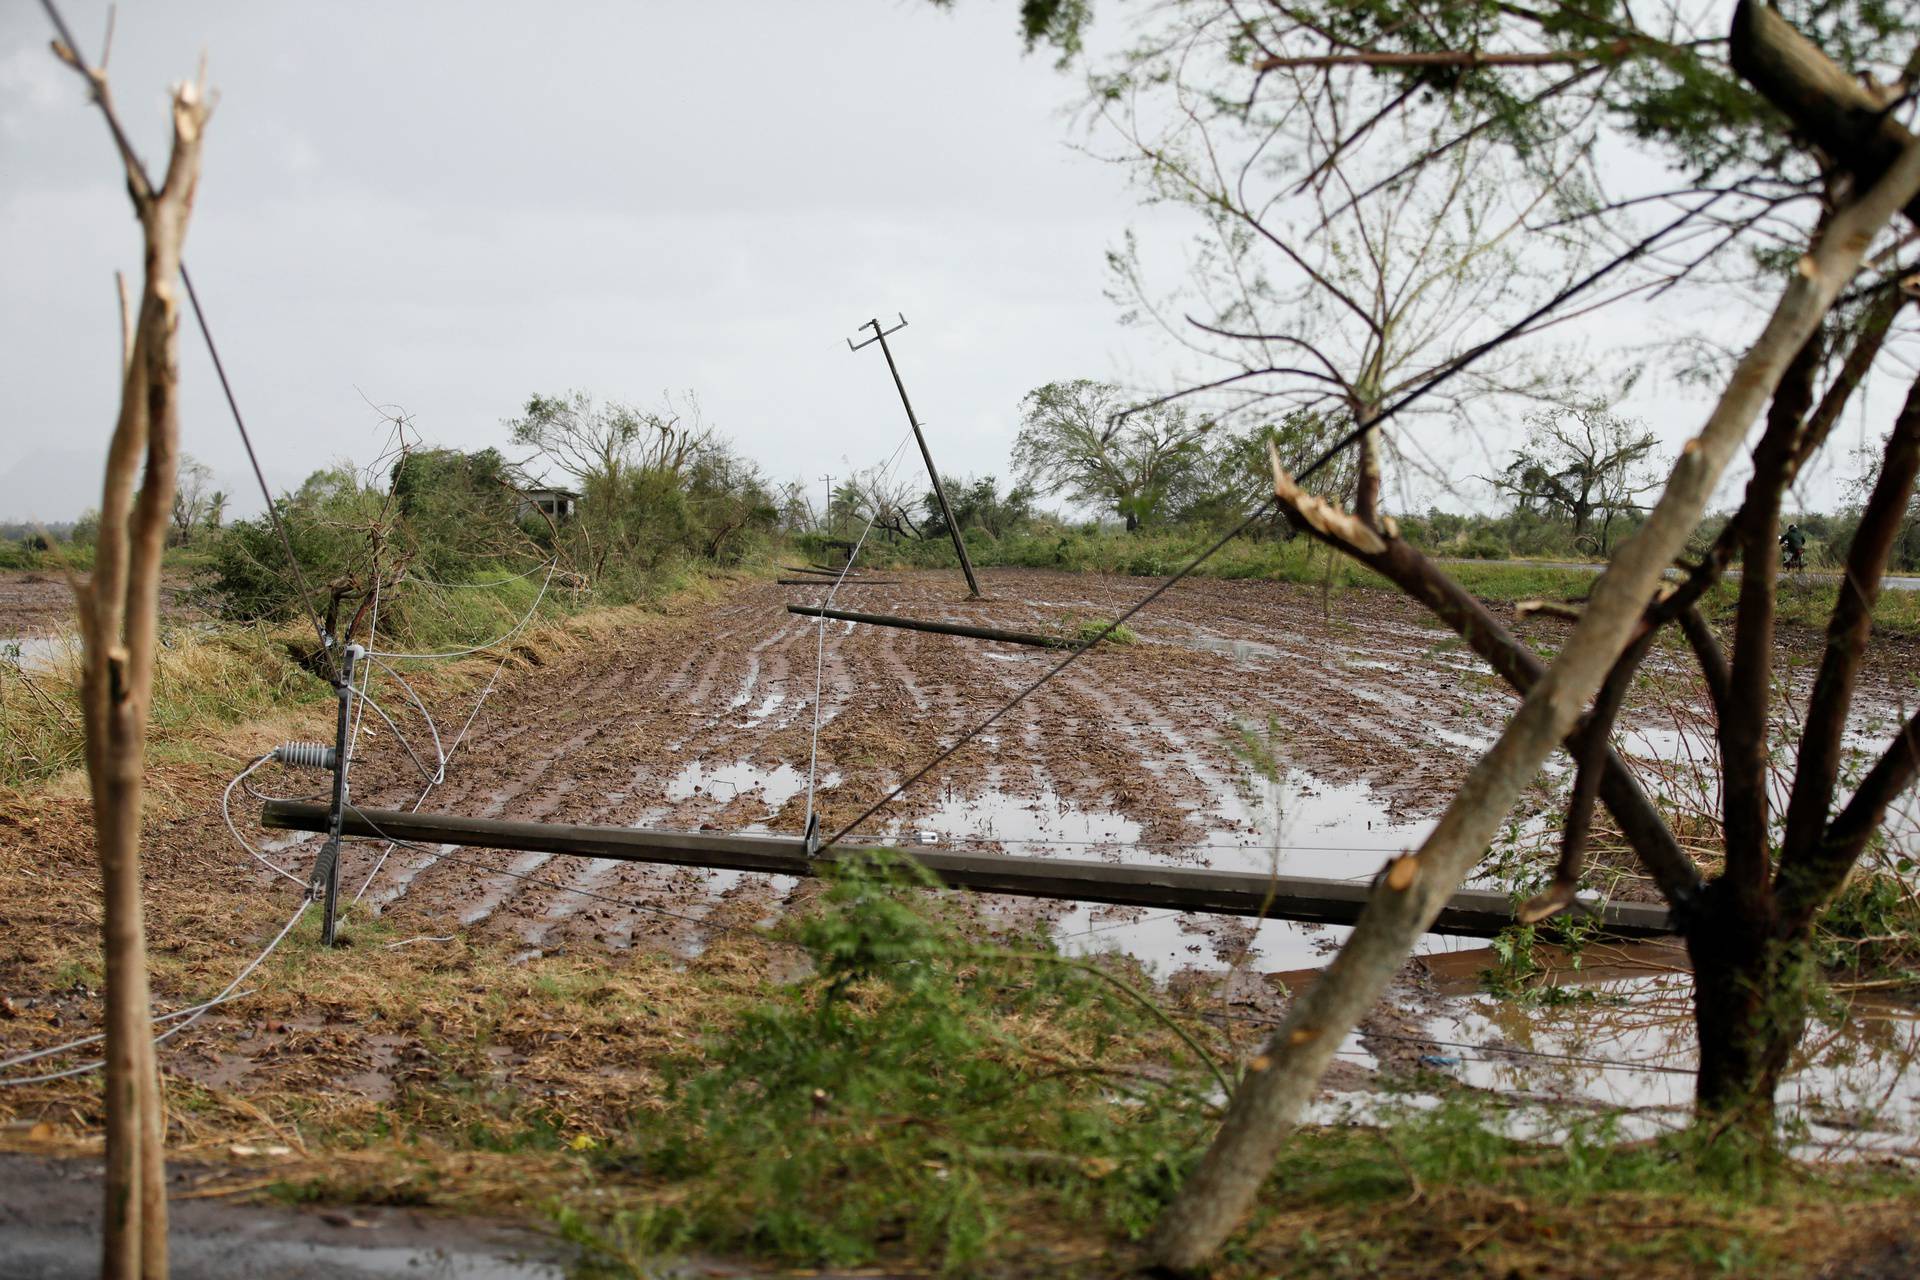 Aftermath of Hurricane Roslyn in Mexico